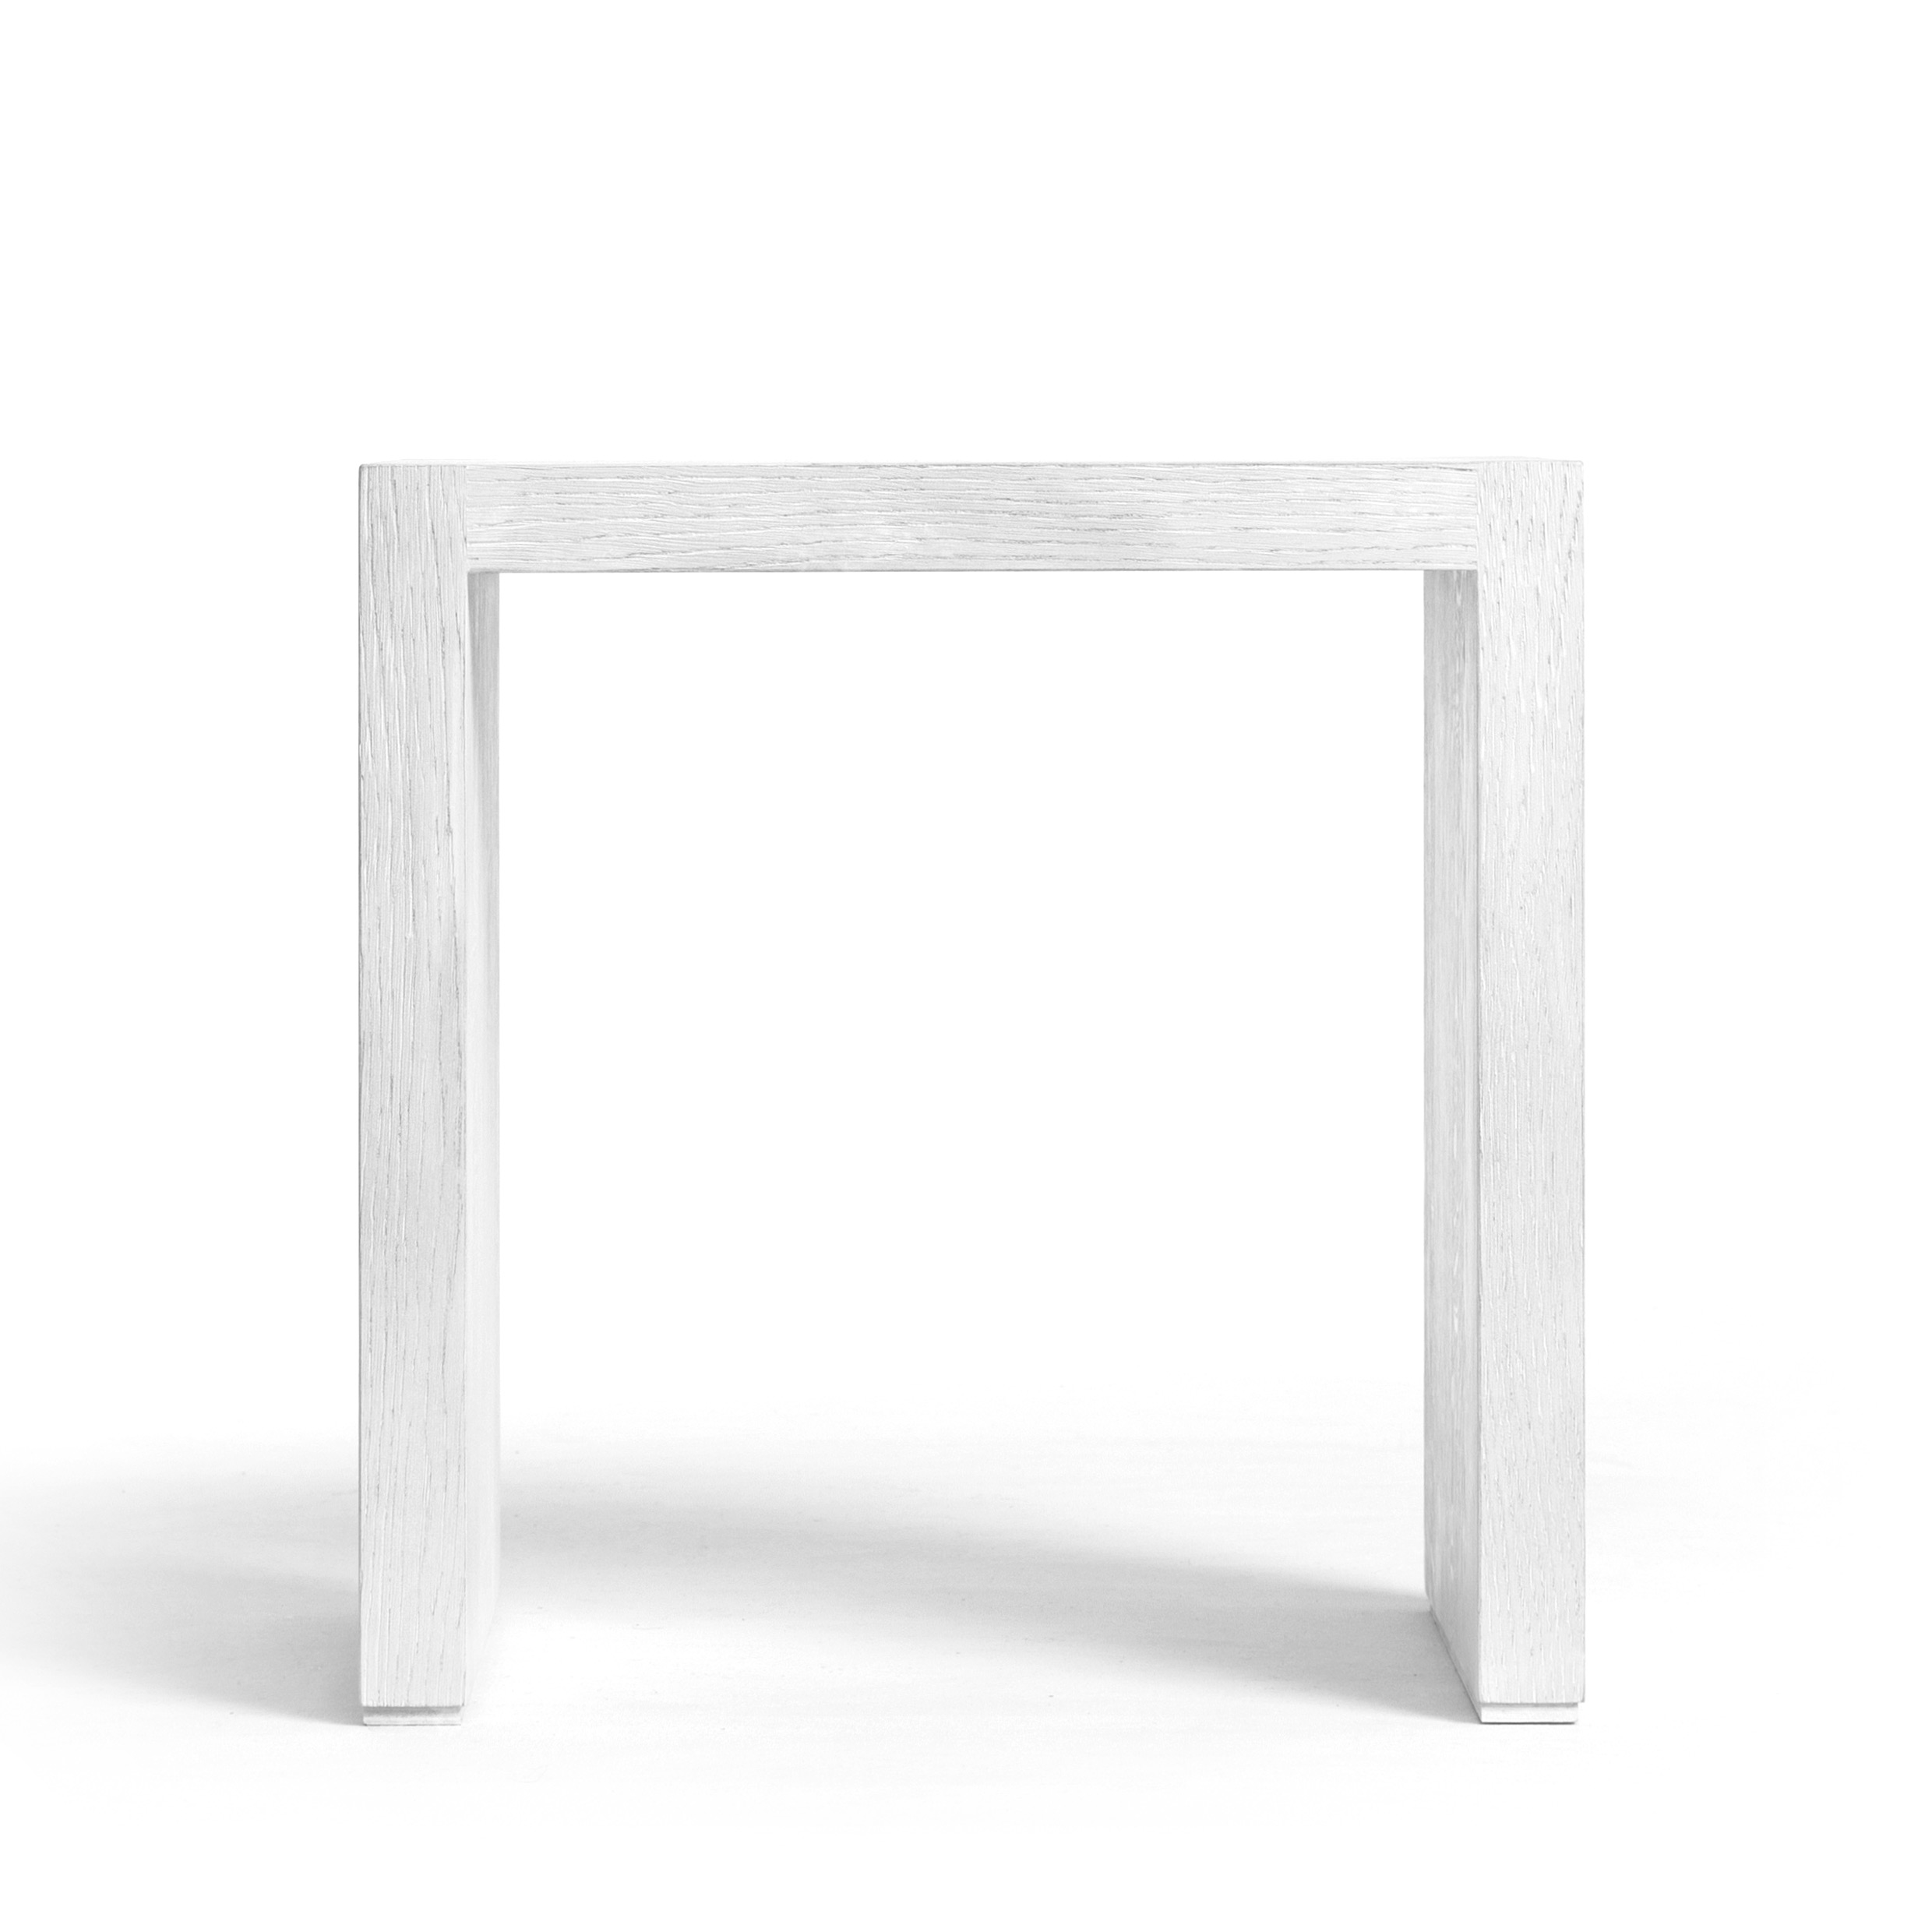 FORM EXCLUSIVE // BERTRAM - SIDE TABLE | SOLID OAK | PRONG CONNECTION - OAK // WHITE OILED